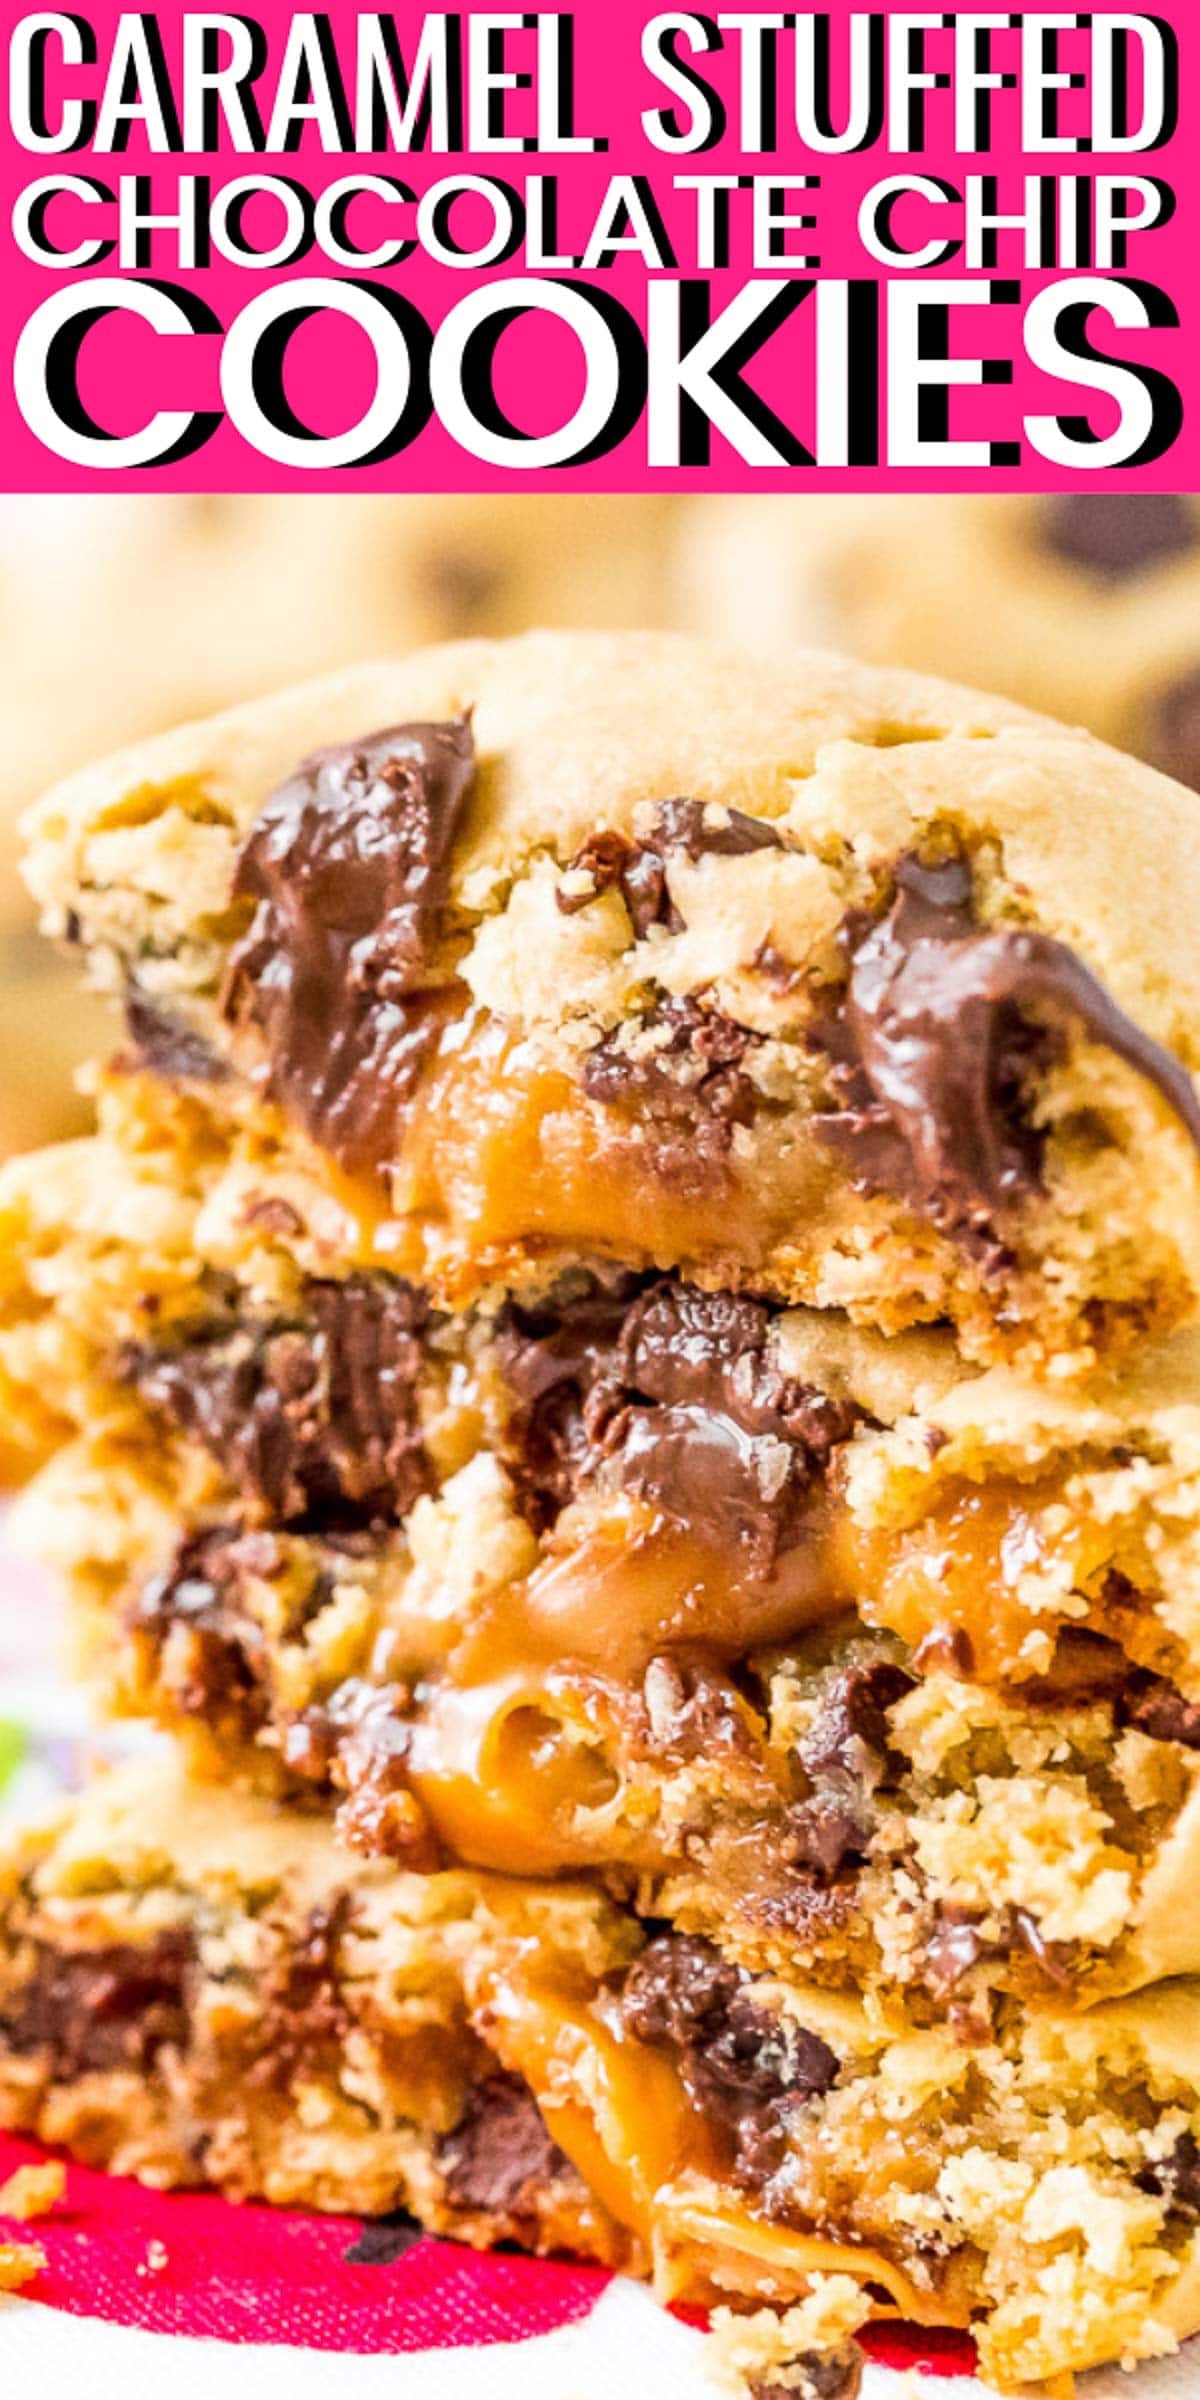 Caramel Chocolate Chip Cookies are made with a simple pudding cookie dough that's loaded with chocolate chips and stuffed with chewy caramel squares for a gooey center! via @sugarandsoulco